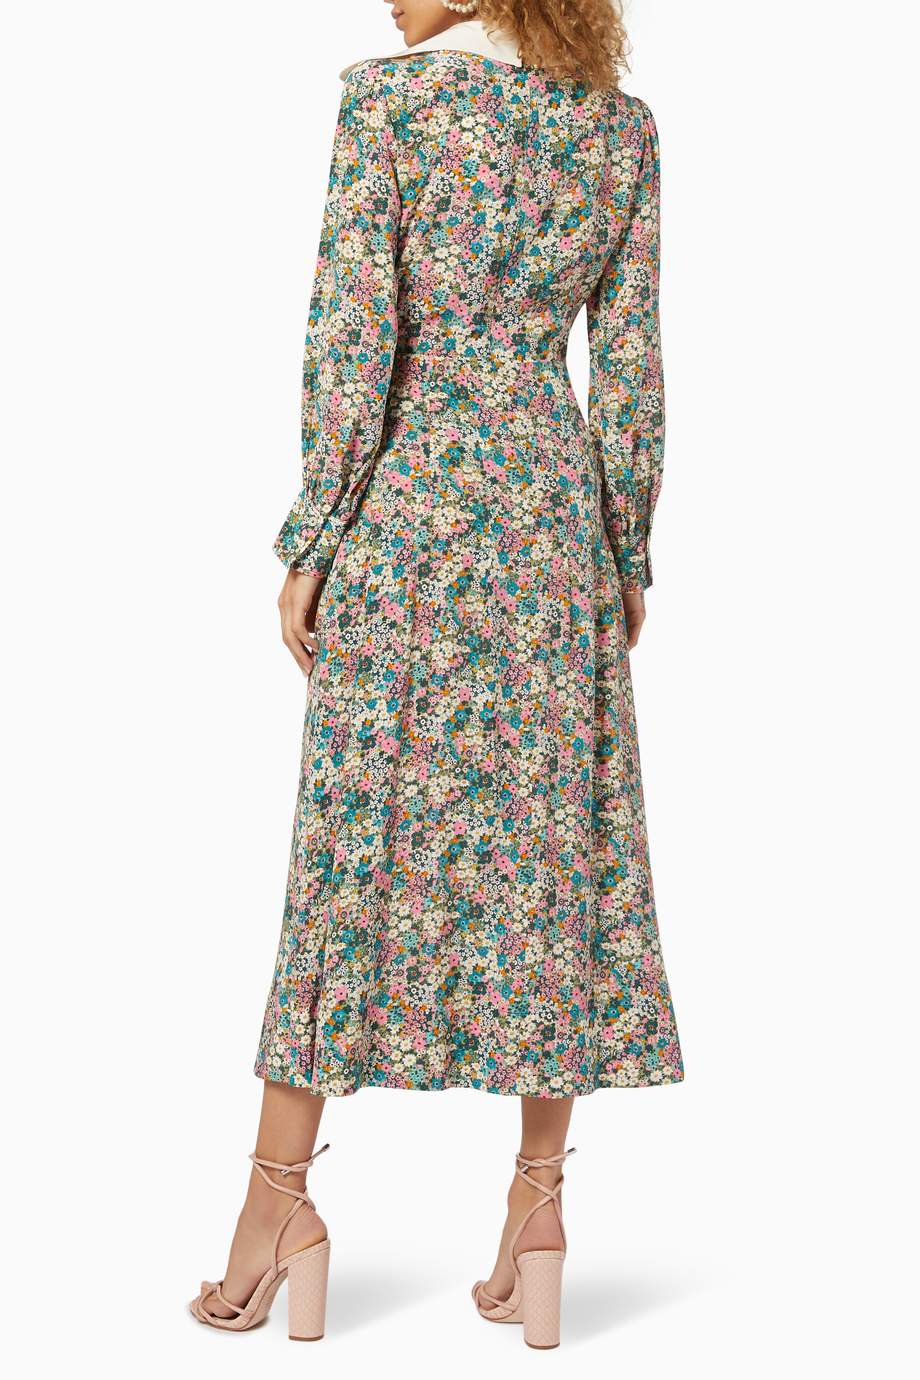 Shop See By Chloé Multicolour Floral Meadow Silk Dress for Women ...